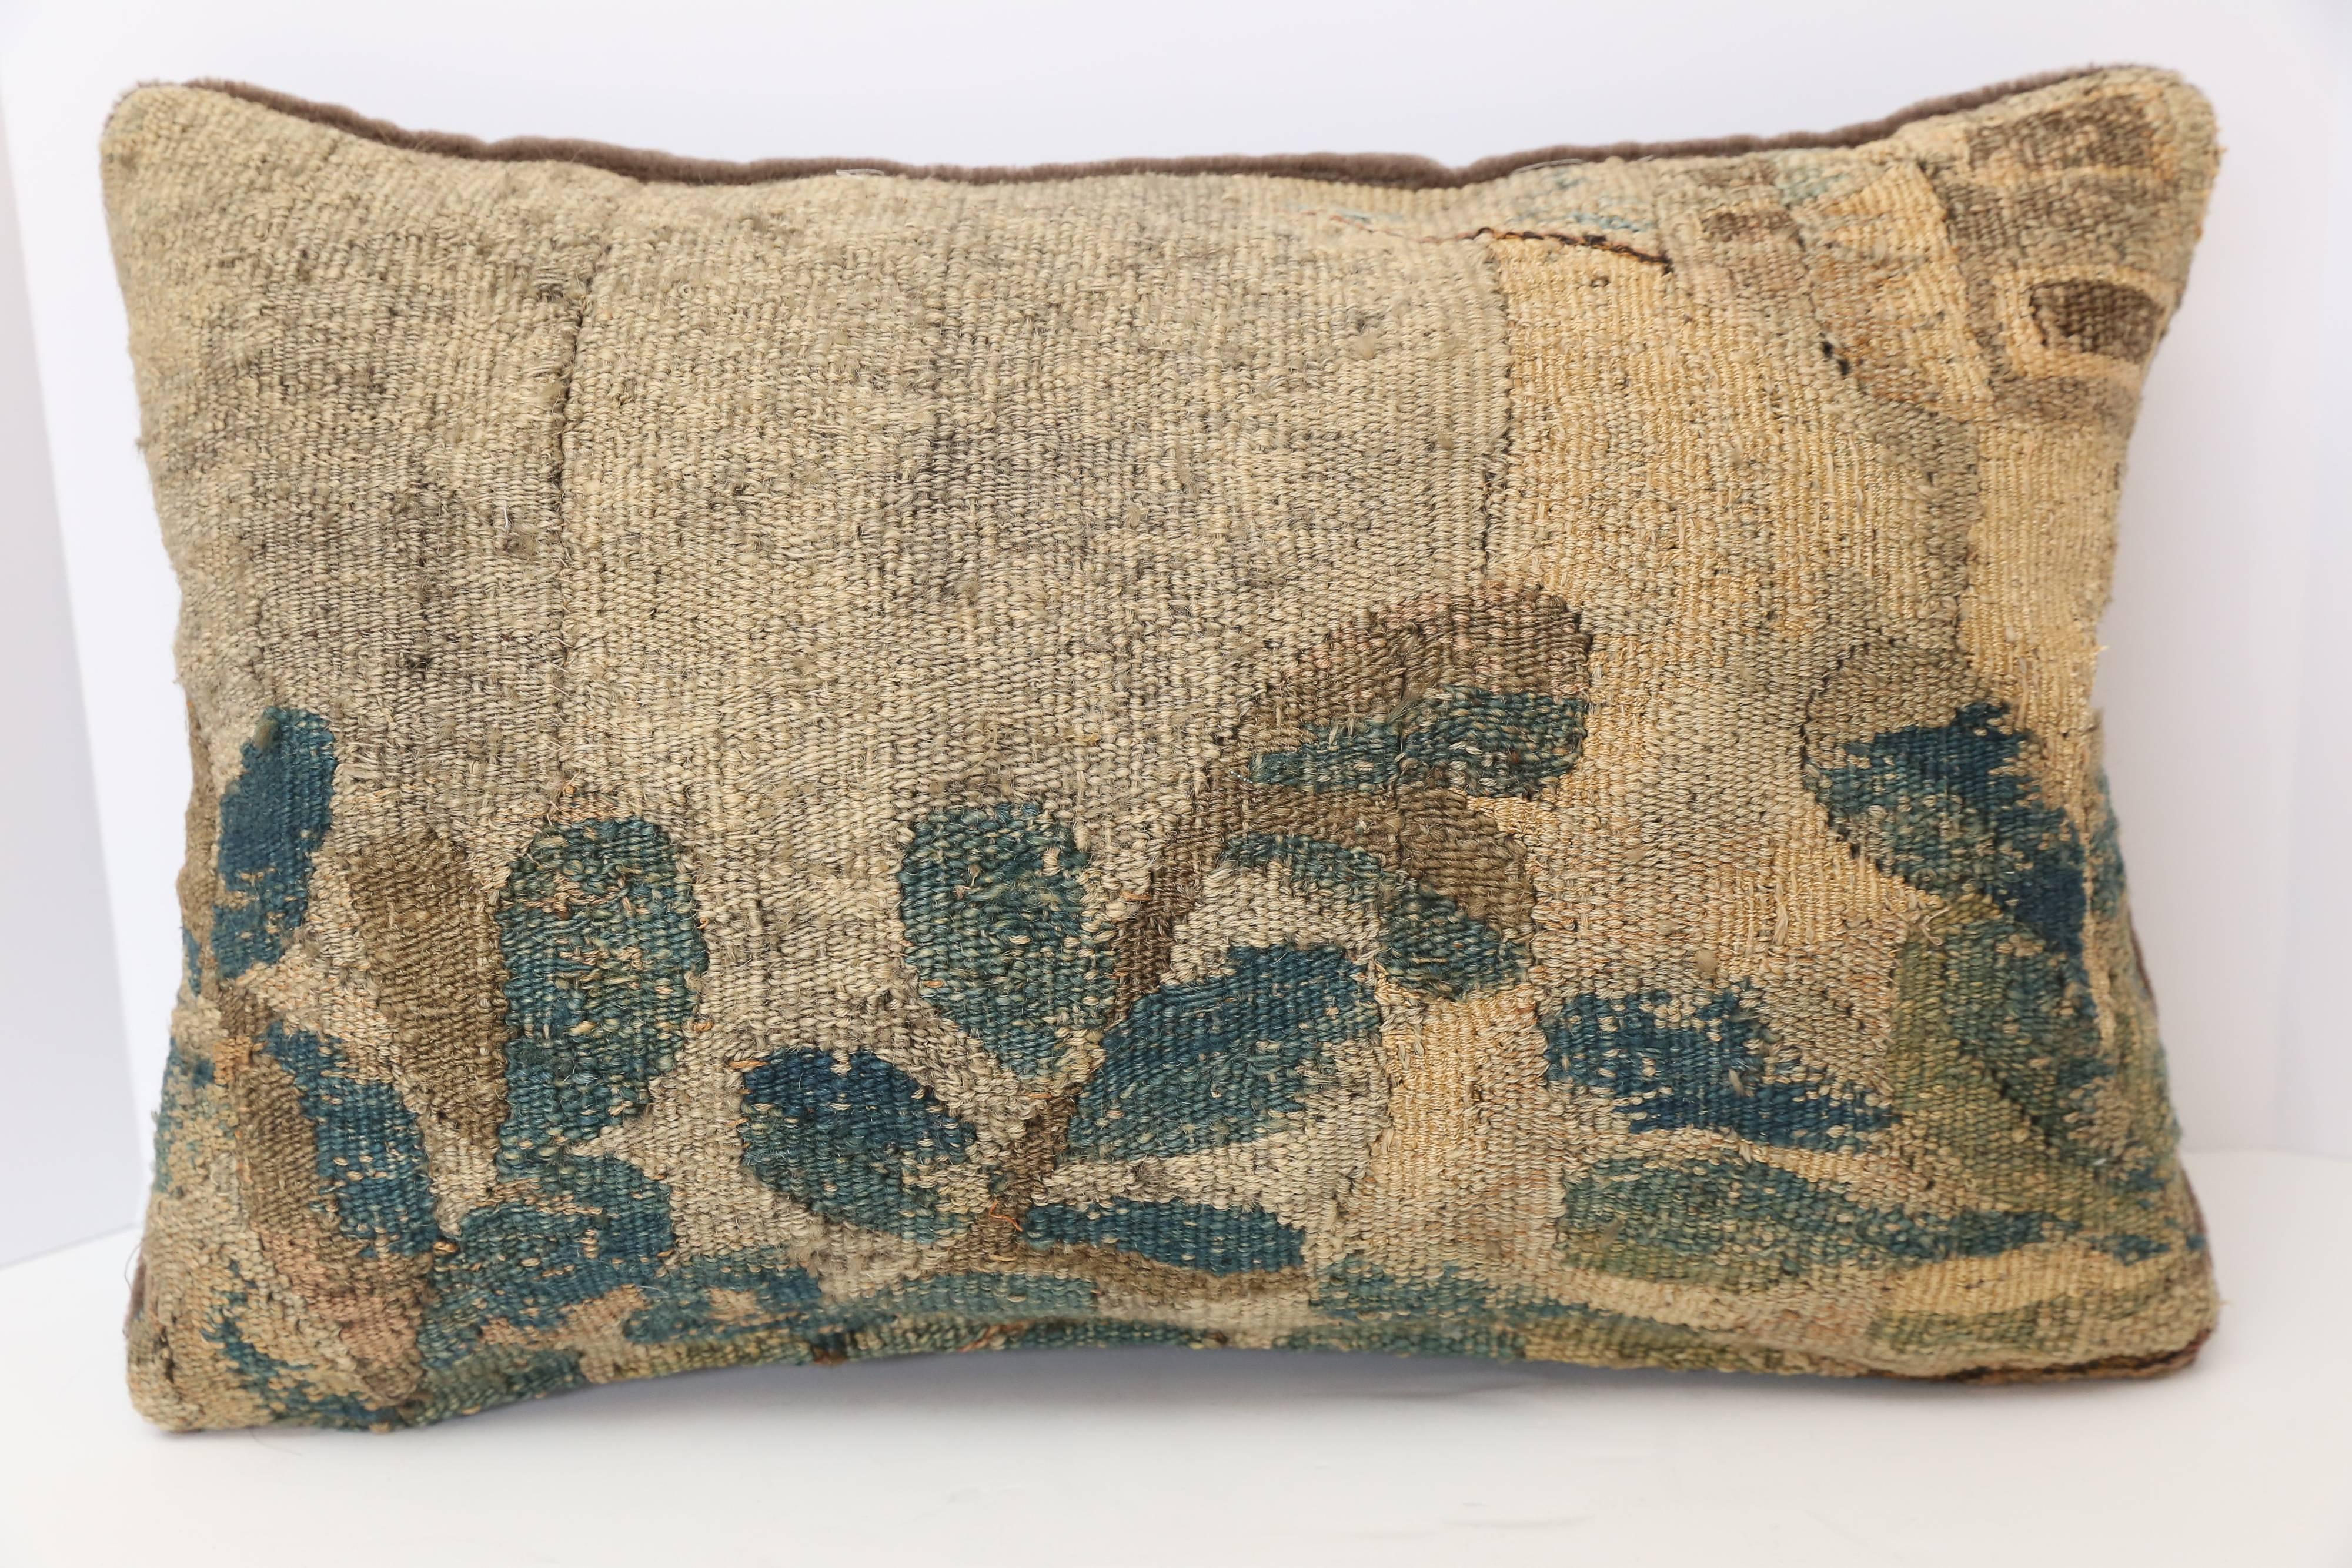 18th century Aubusson pillow filled with down.